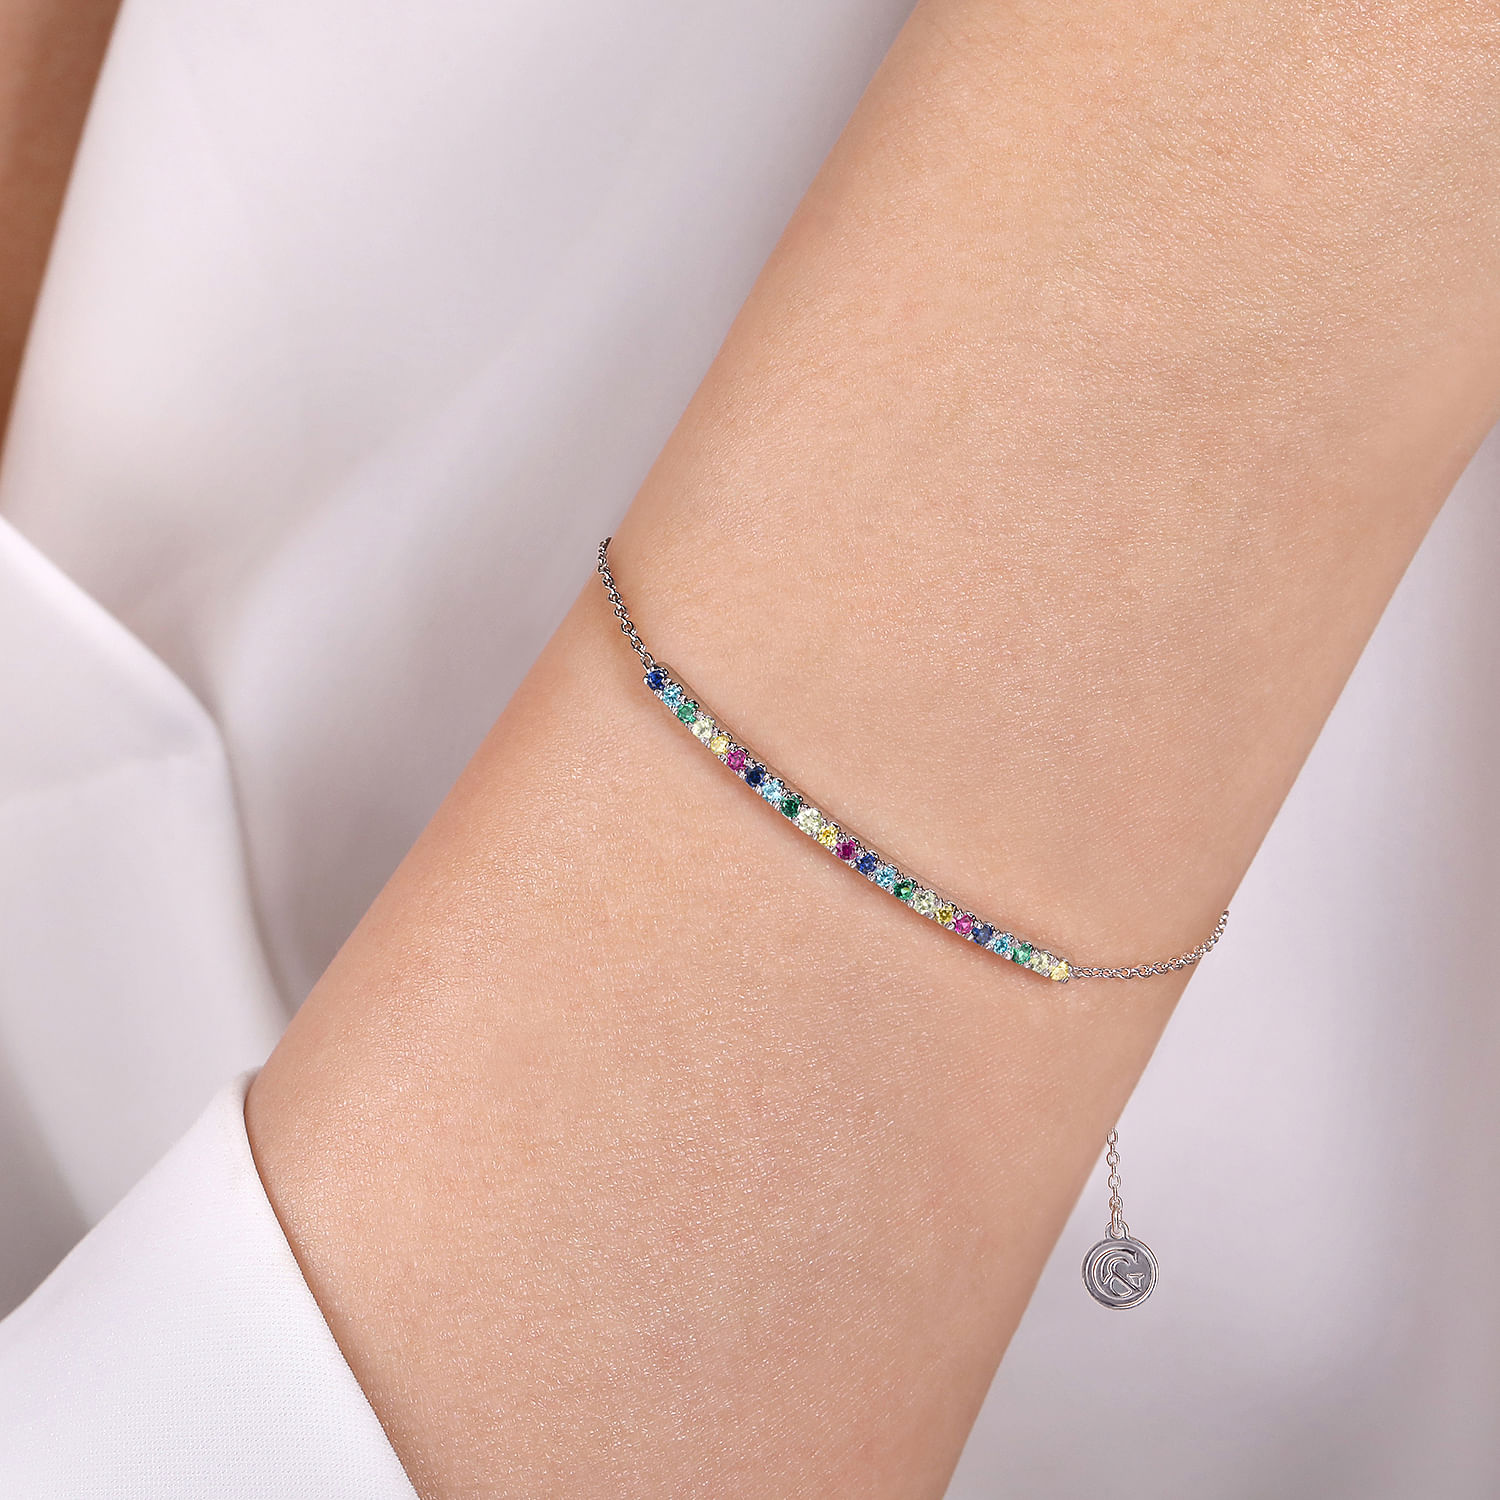 14K White Gold Chain Bracelet with Rainbow Color Stone Bar 